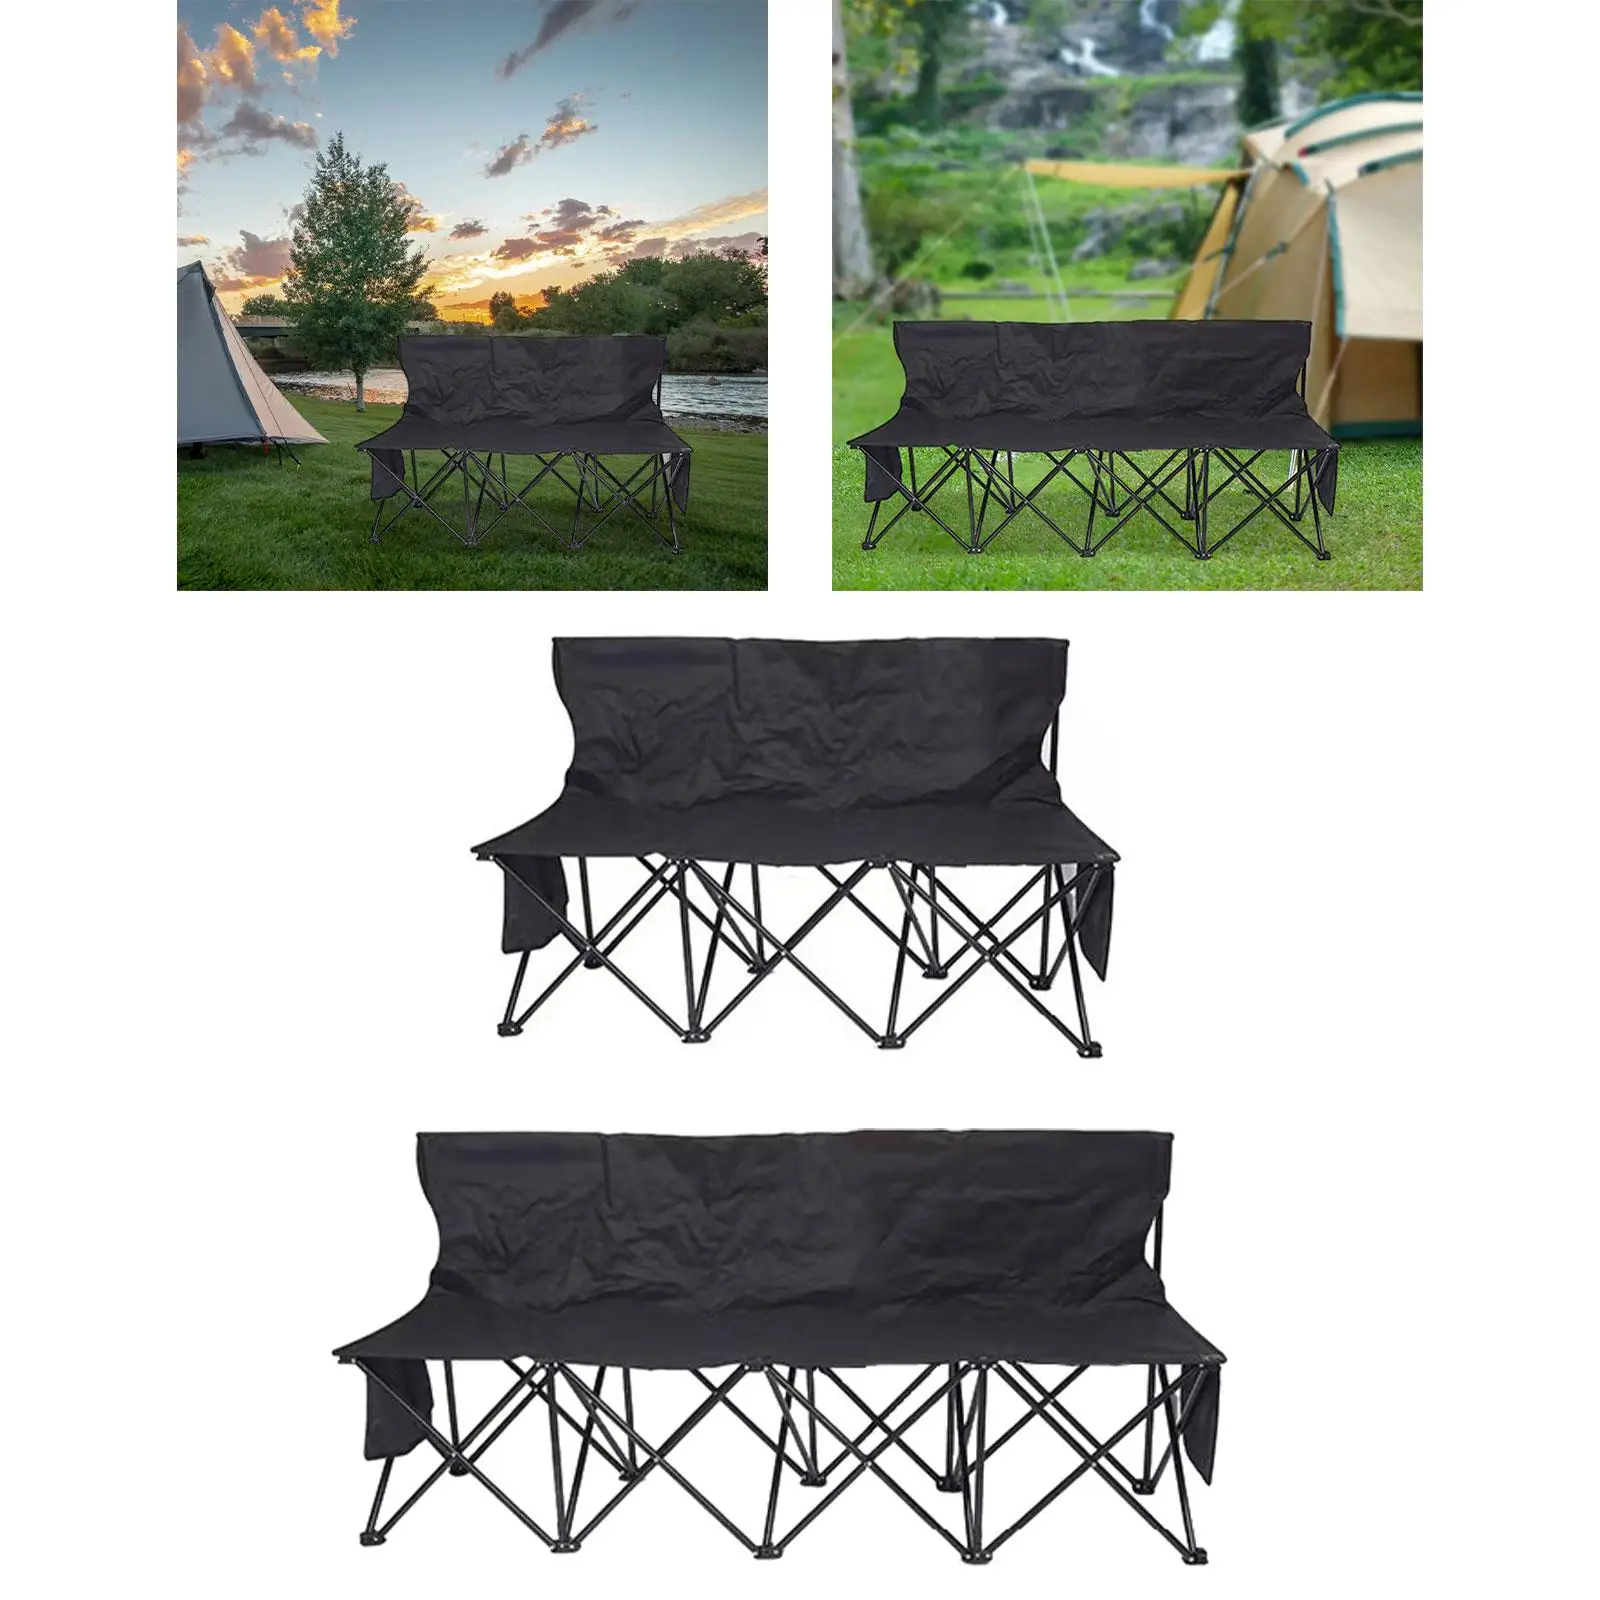 Folding Bench Chair Lightweight for Adults with Back Support Foldable Sideline Bench for Events Campsites Camping Beach Backyard